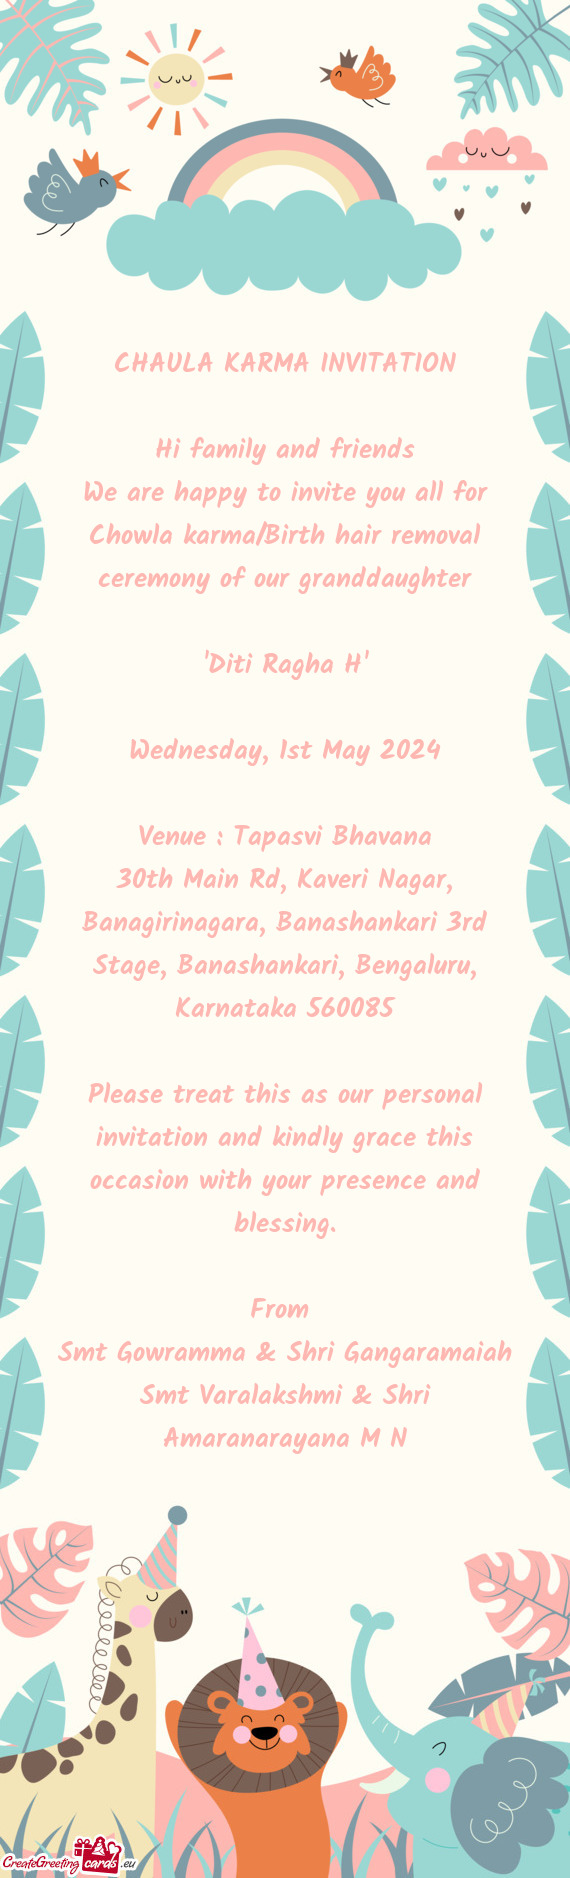 We are happy to invite you all for Chowla karma/Birth hair removal ceremony of our granddaughter